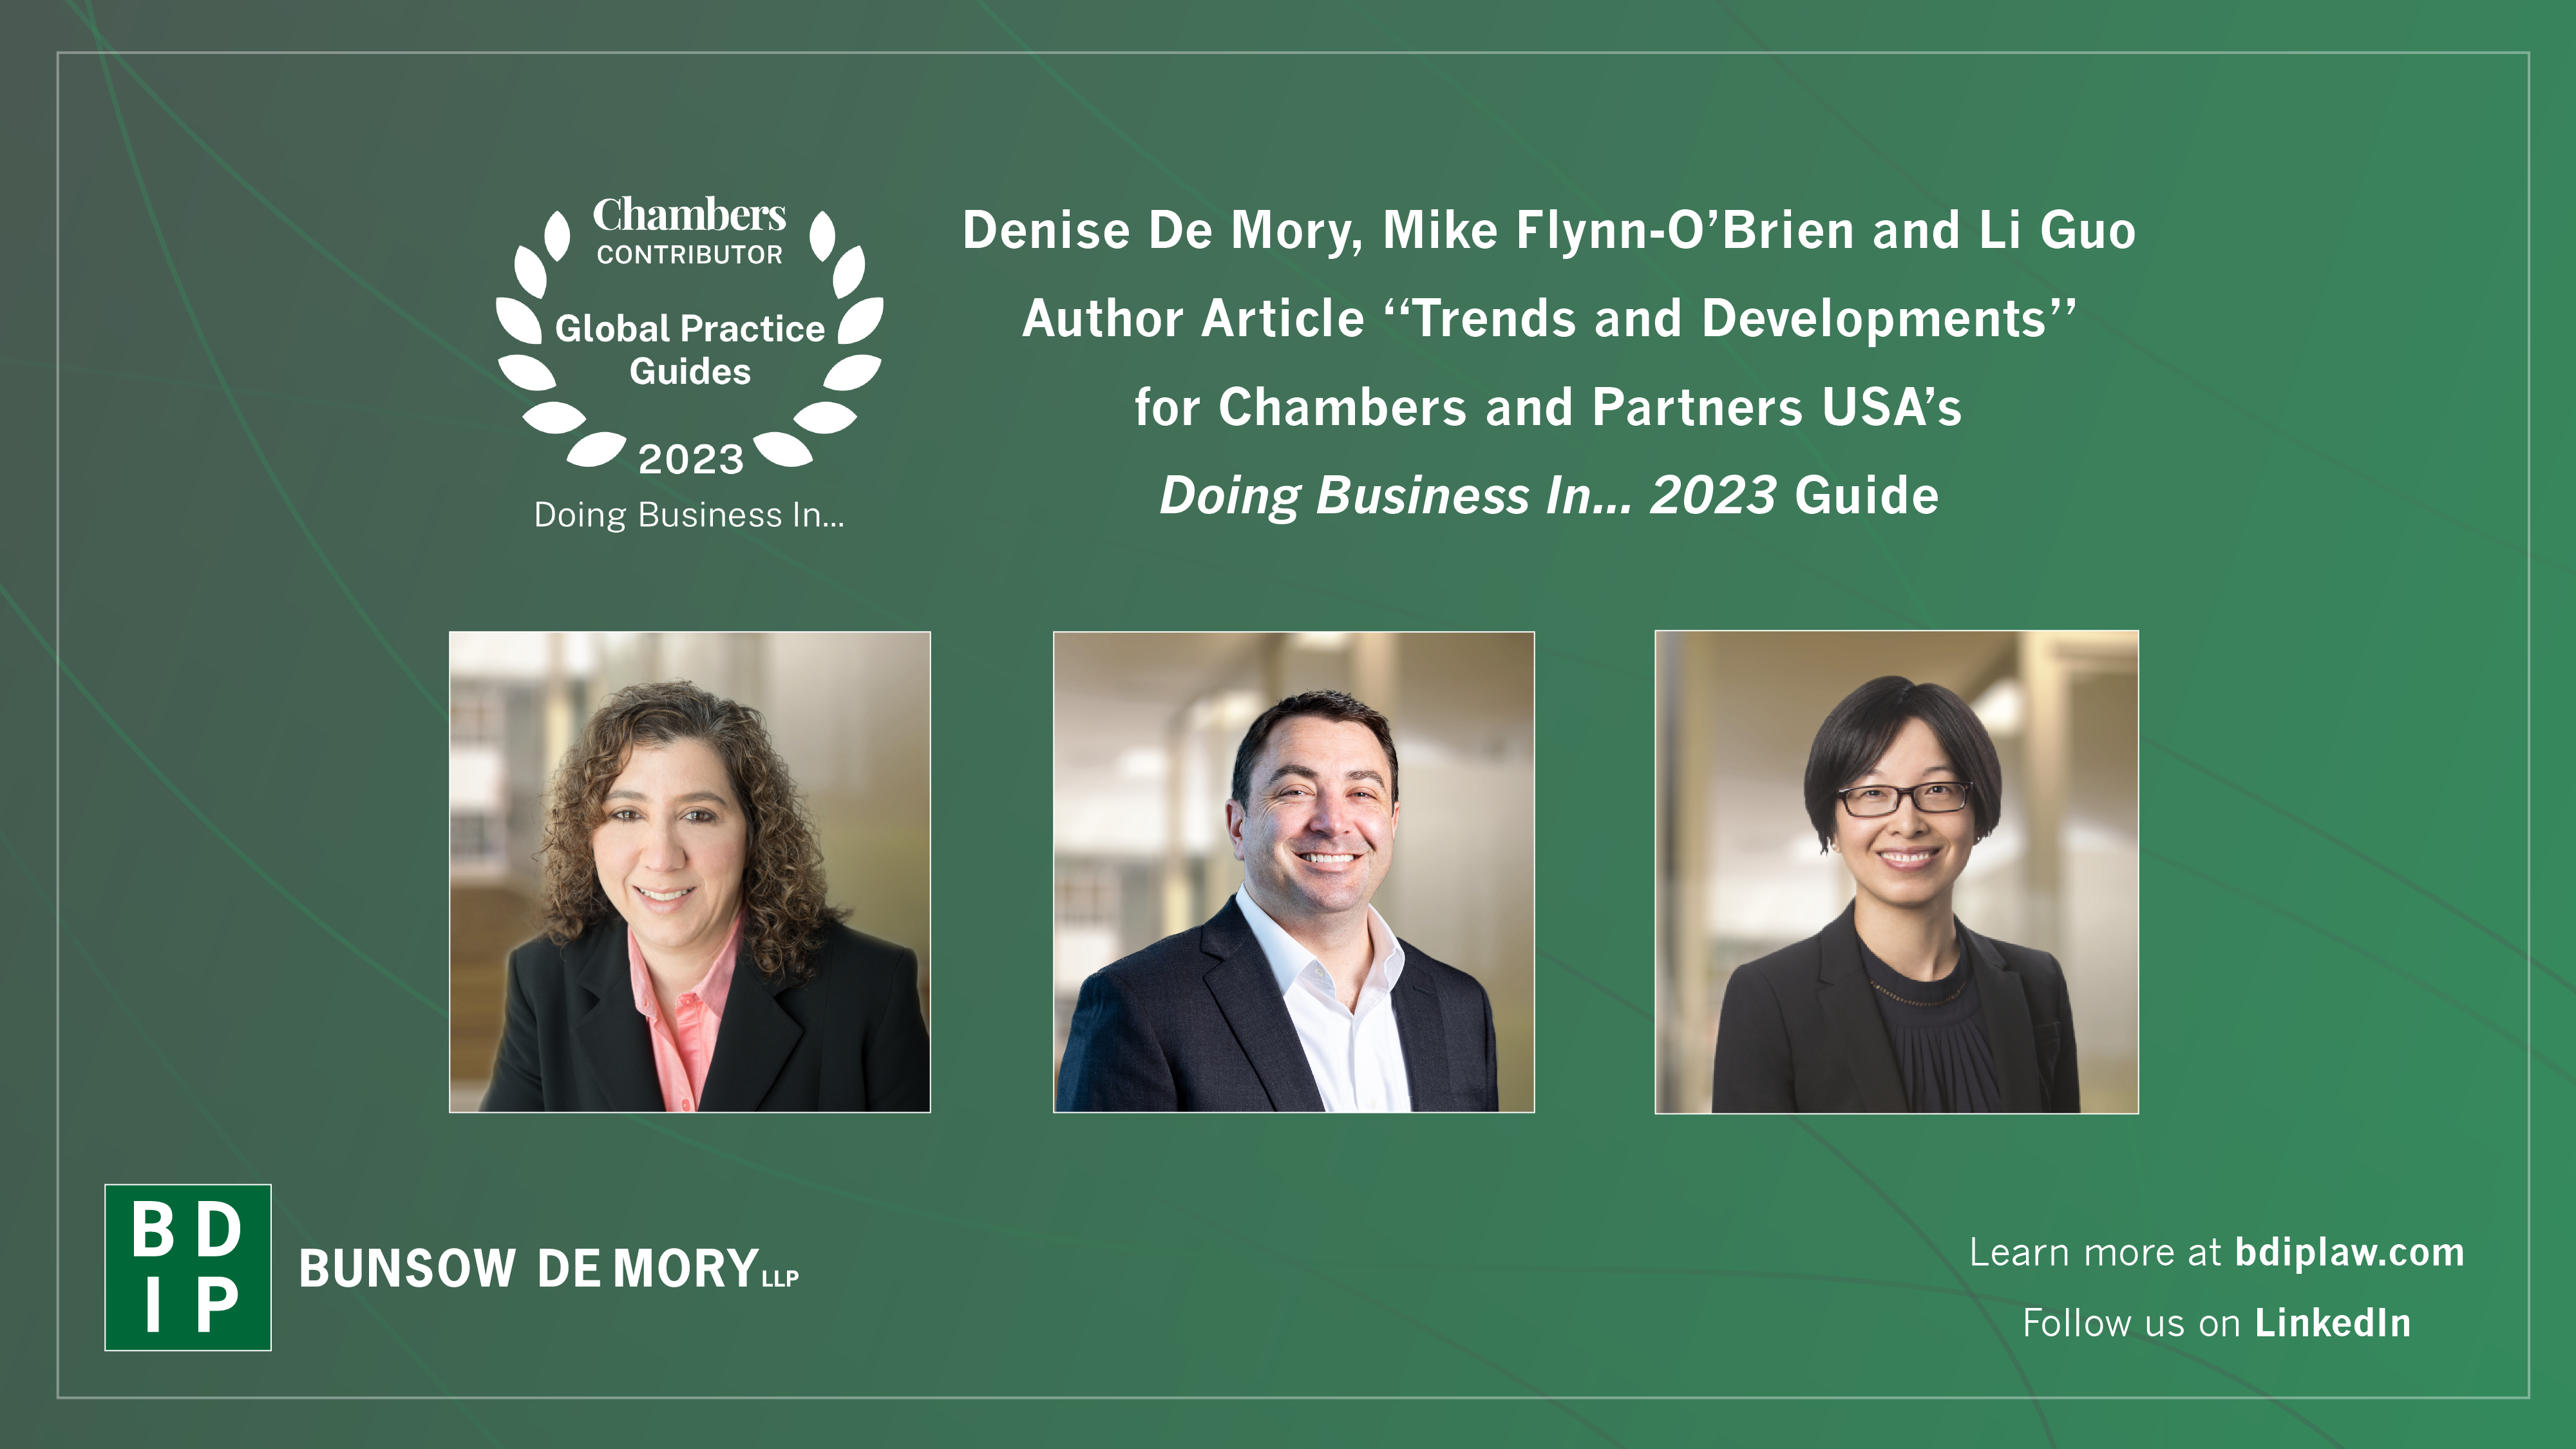 Denise De Mory, Mike Flynn-O’Brien, and Li Guo Author Article for Chambers and Partners USA’s Doing Business in… 2023 Guide